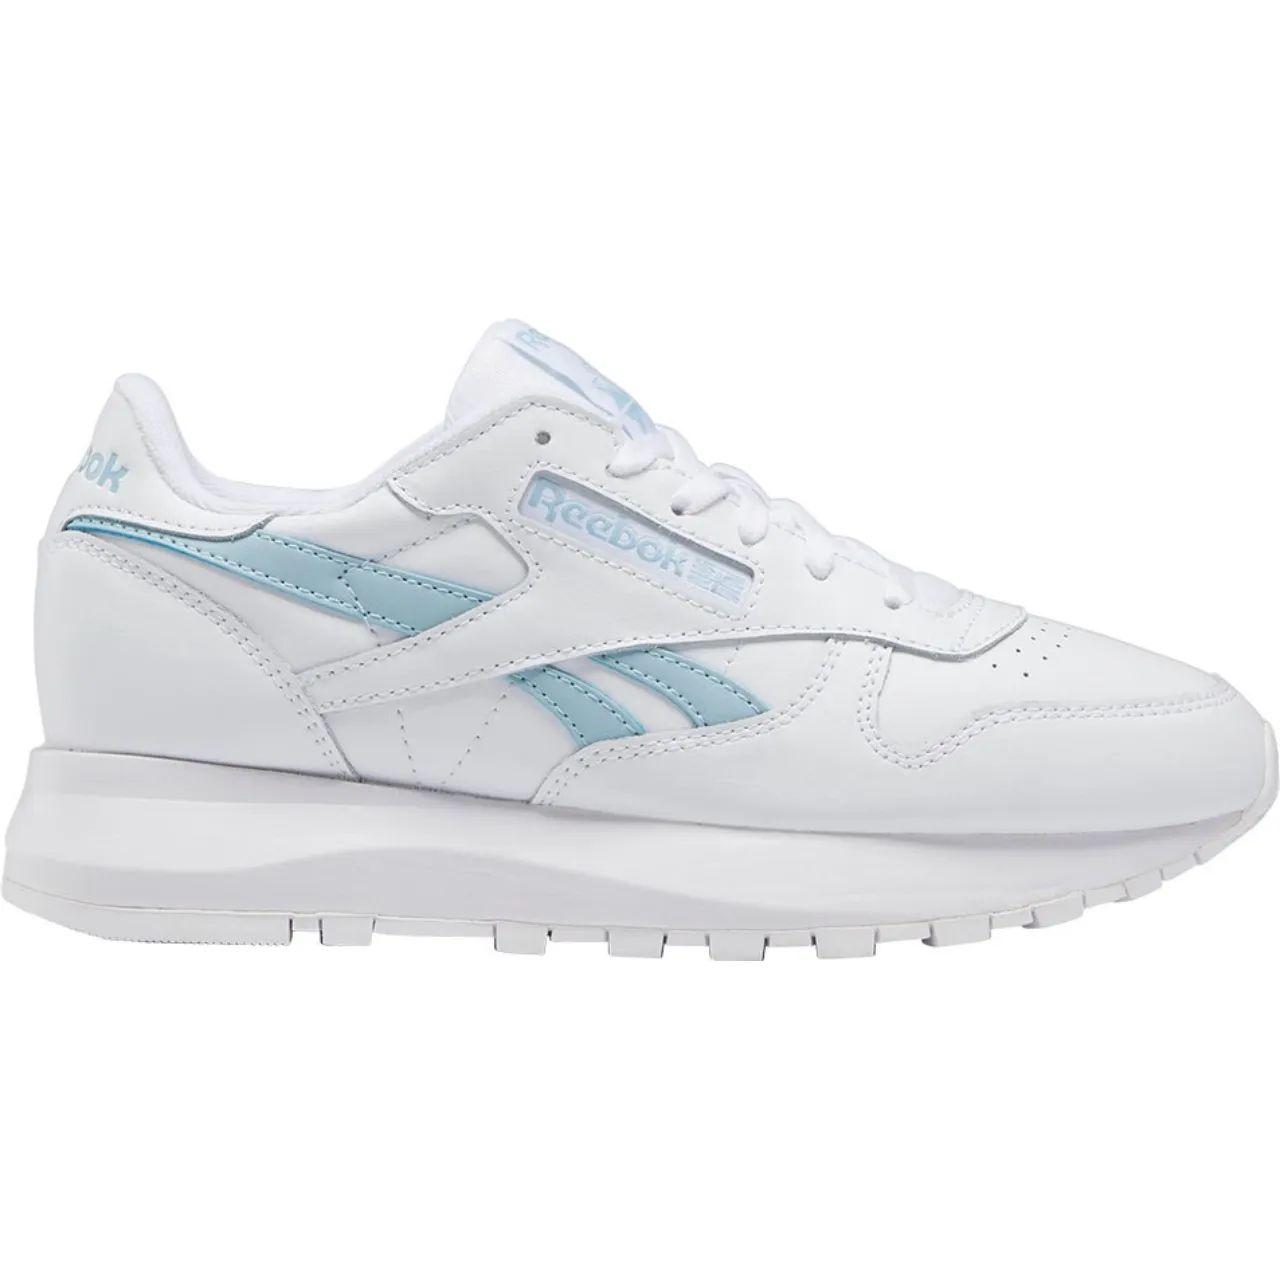 Reebok Classic Leather SP - White | GY7176 | FOOTY.COM